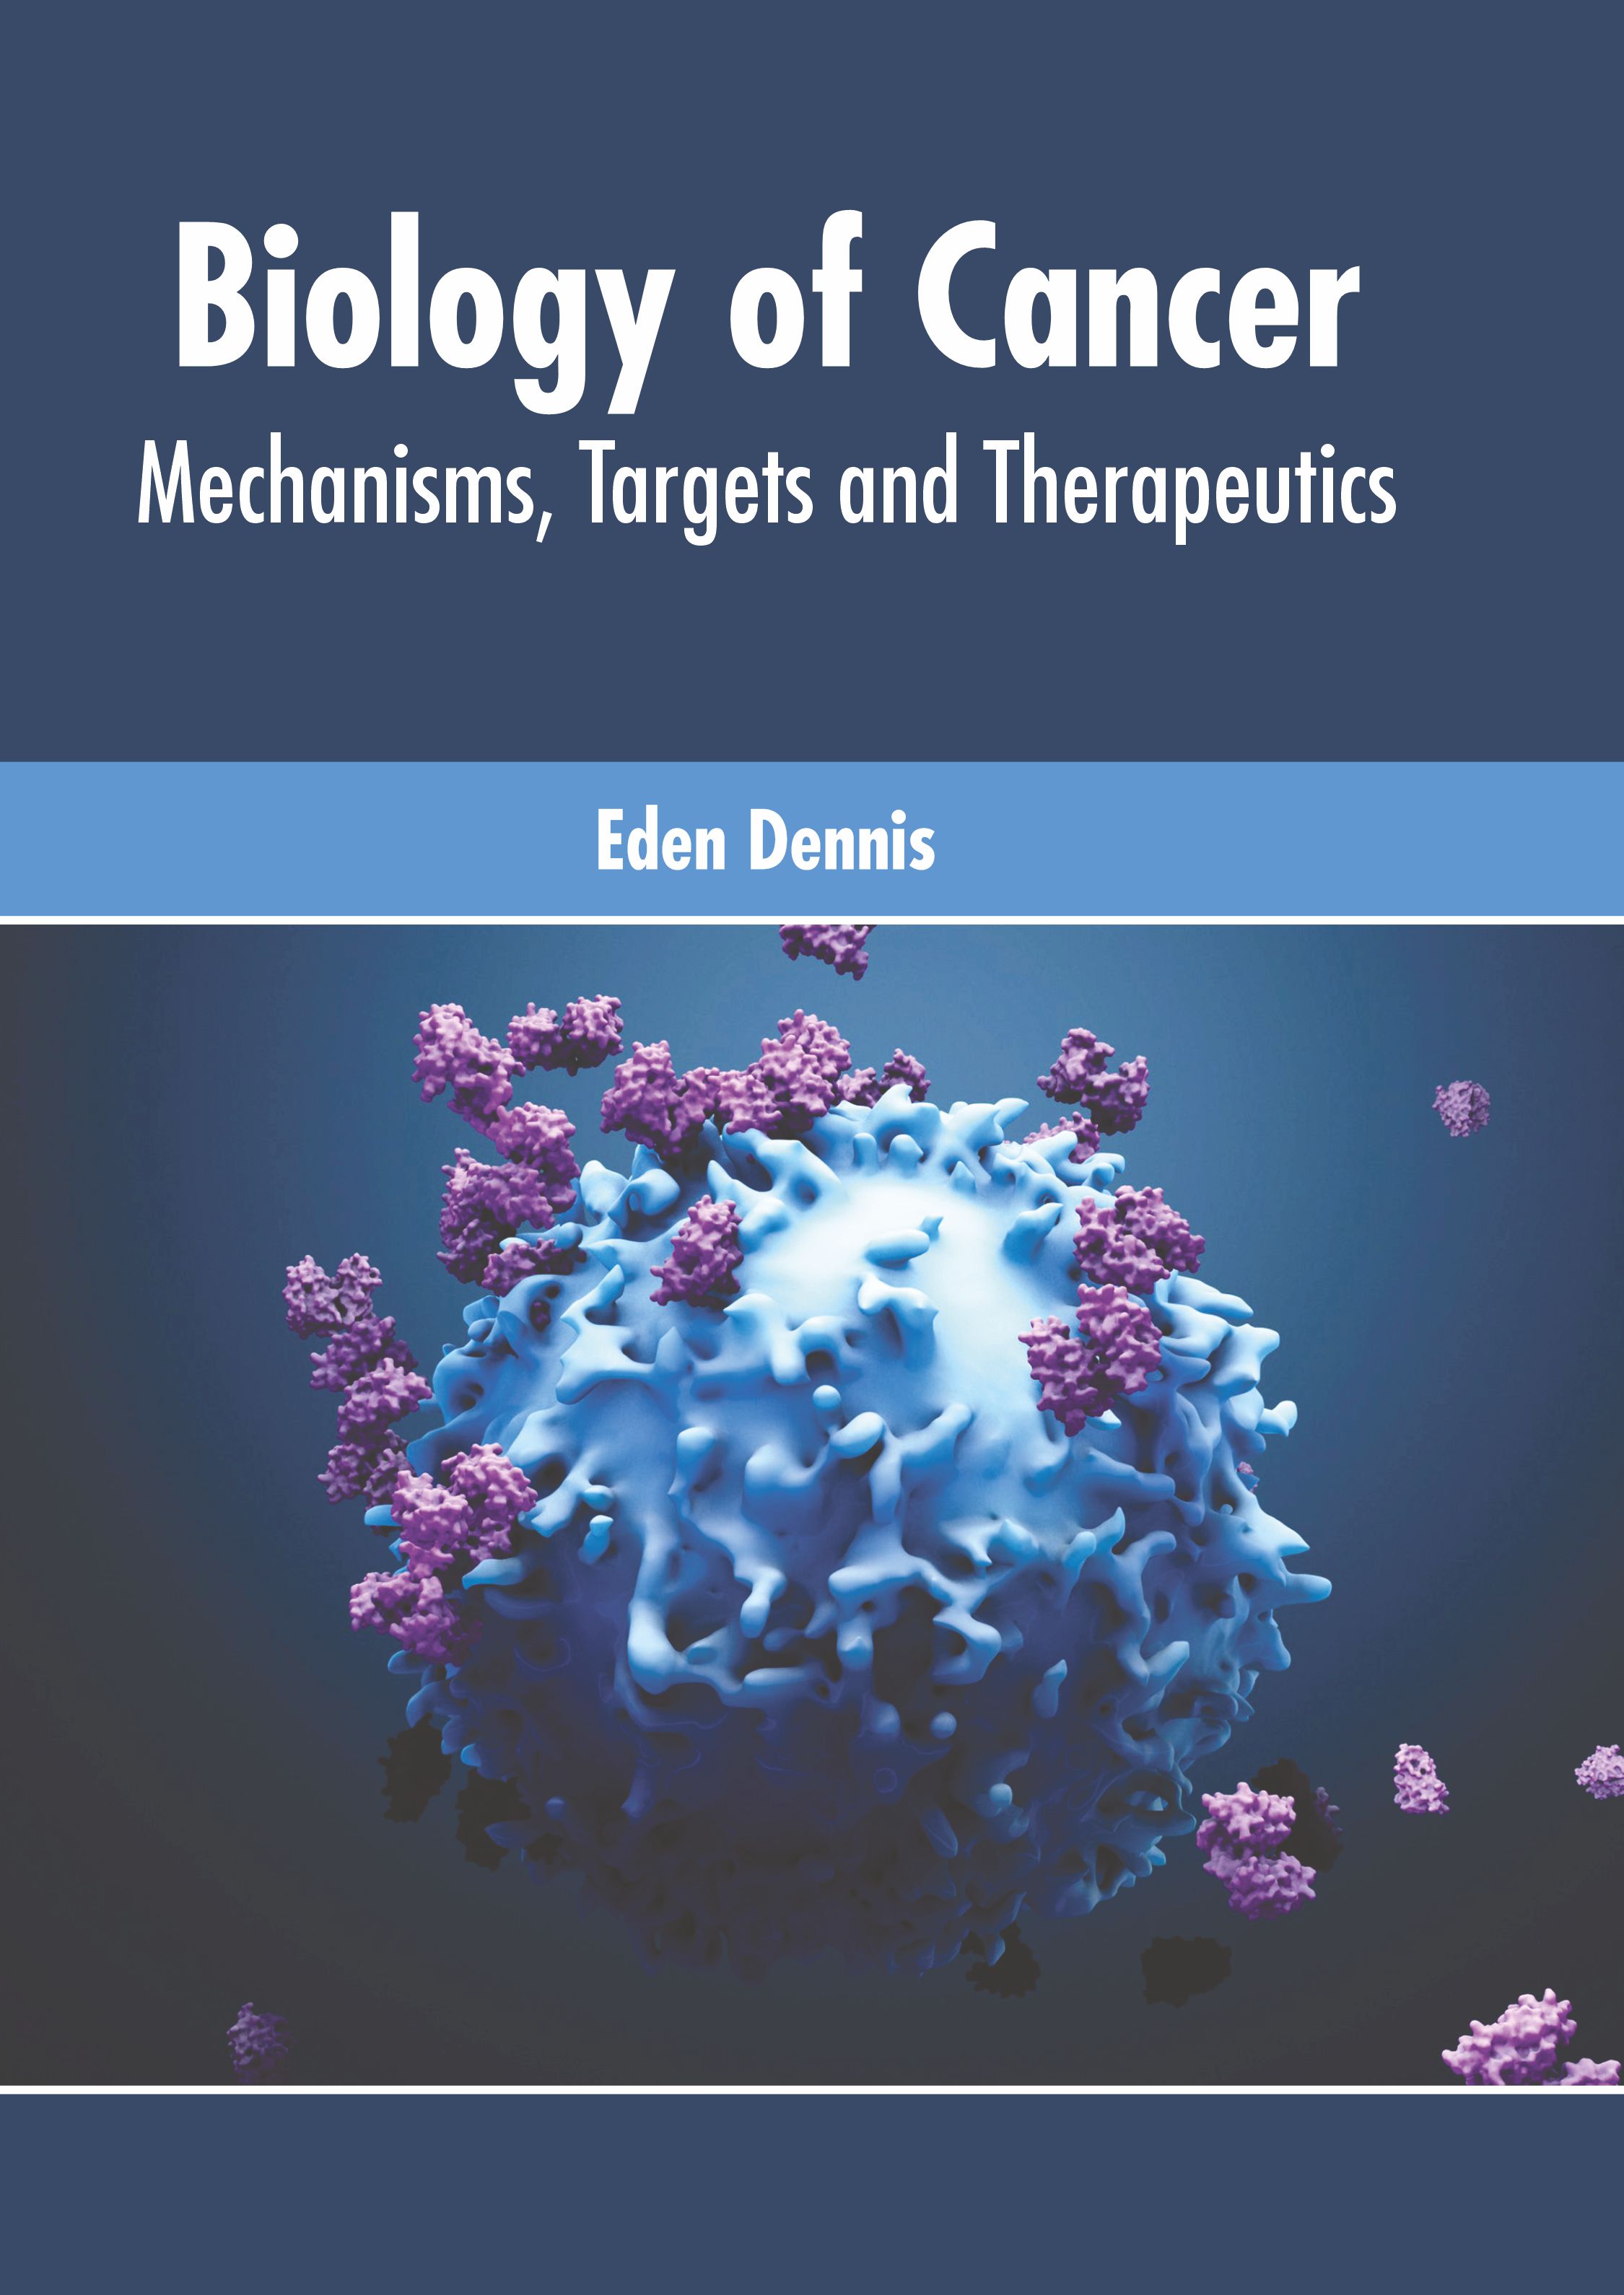 

exclusive-publishers/american-medical-publishers/biology-of-cancer-mechanisms-targets-and-therapeutics-9781639273362